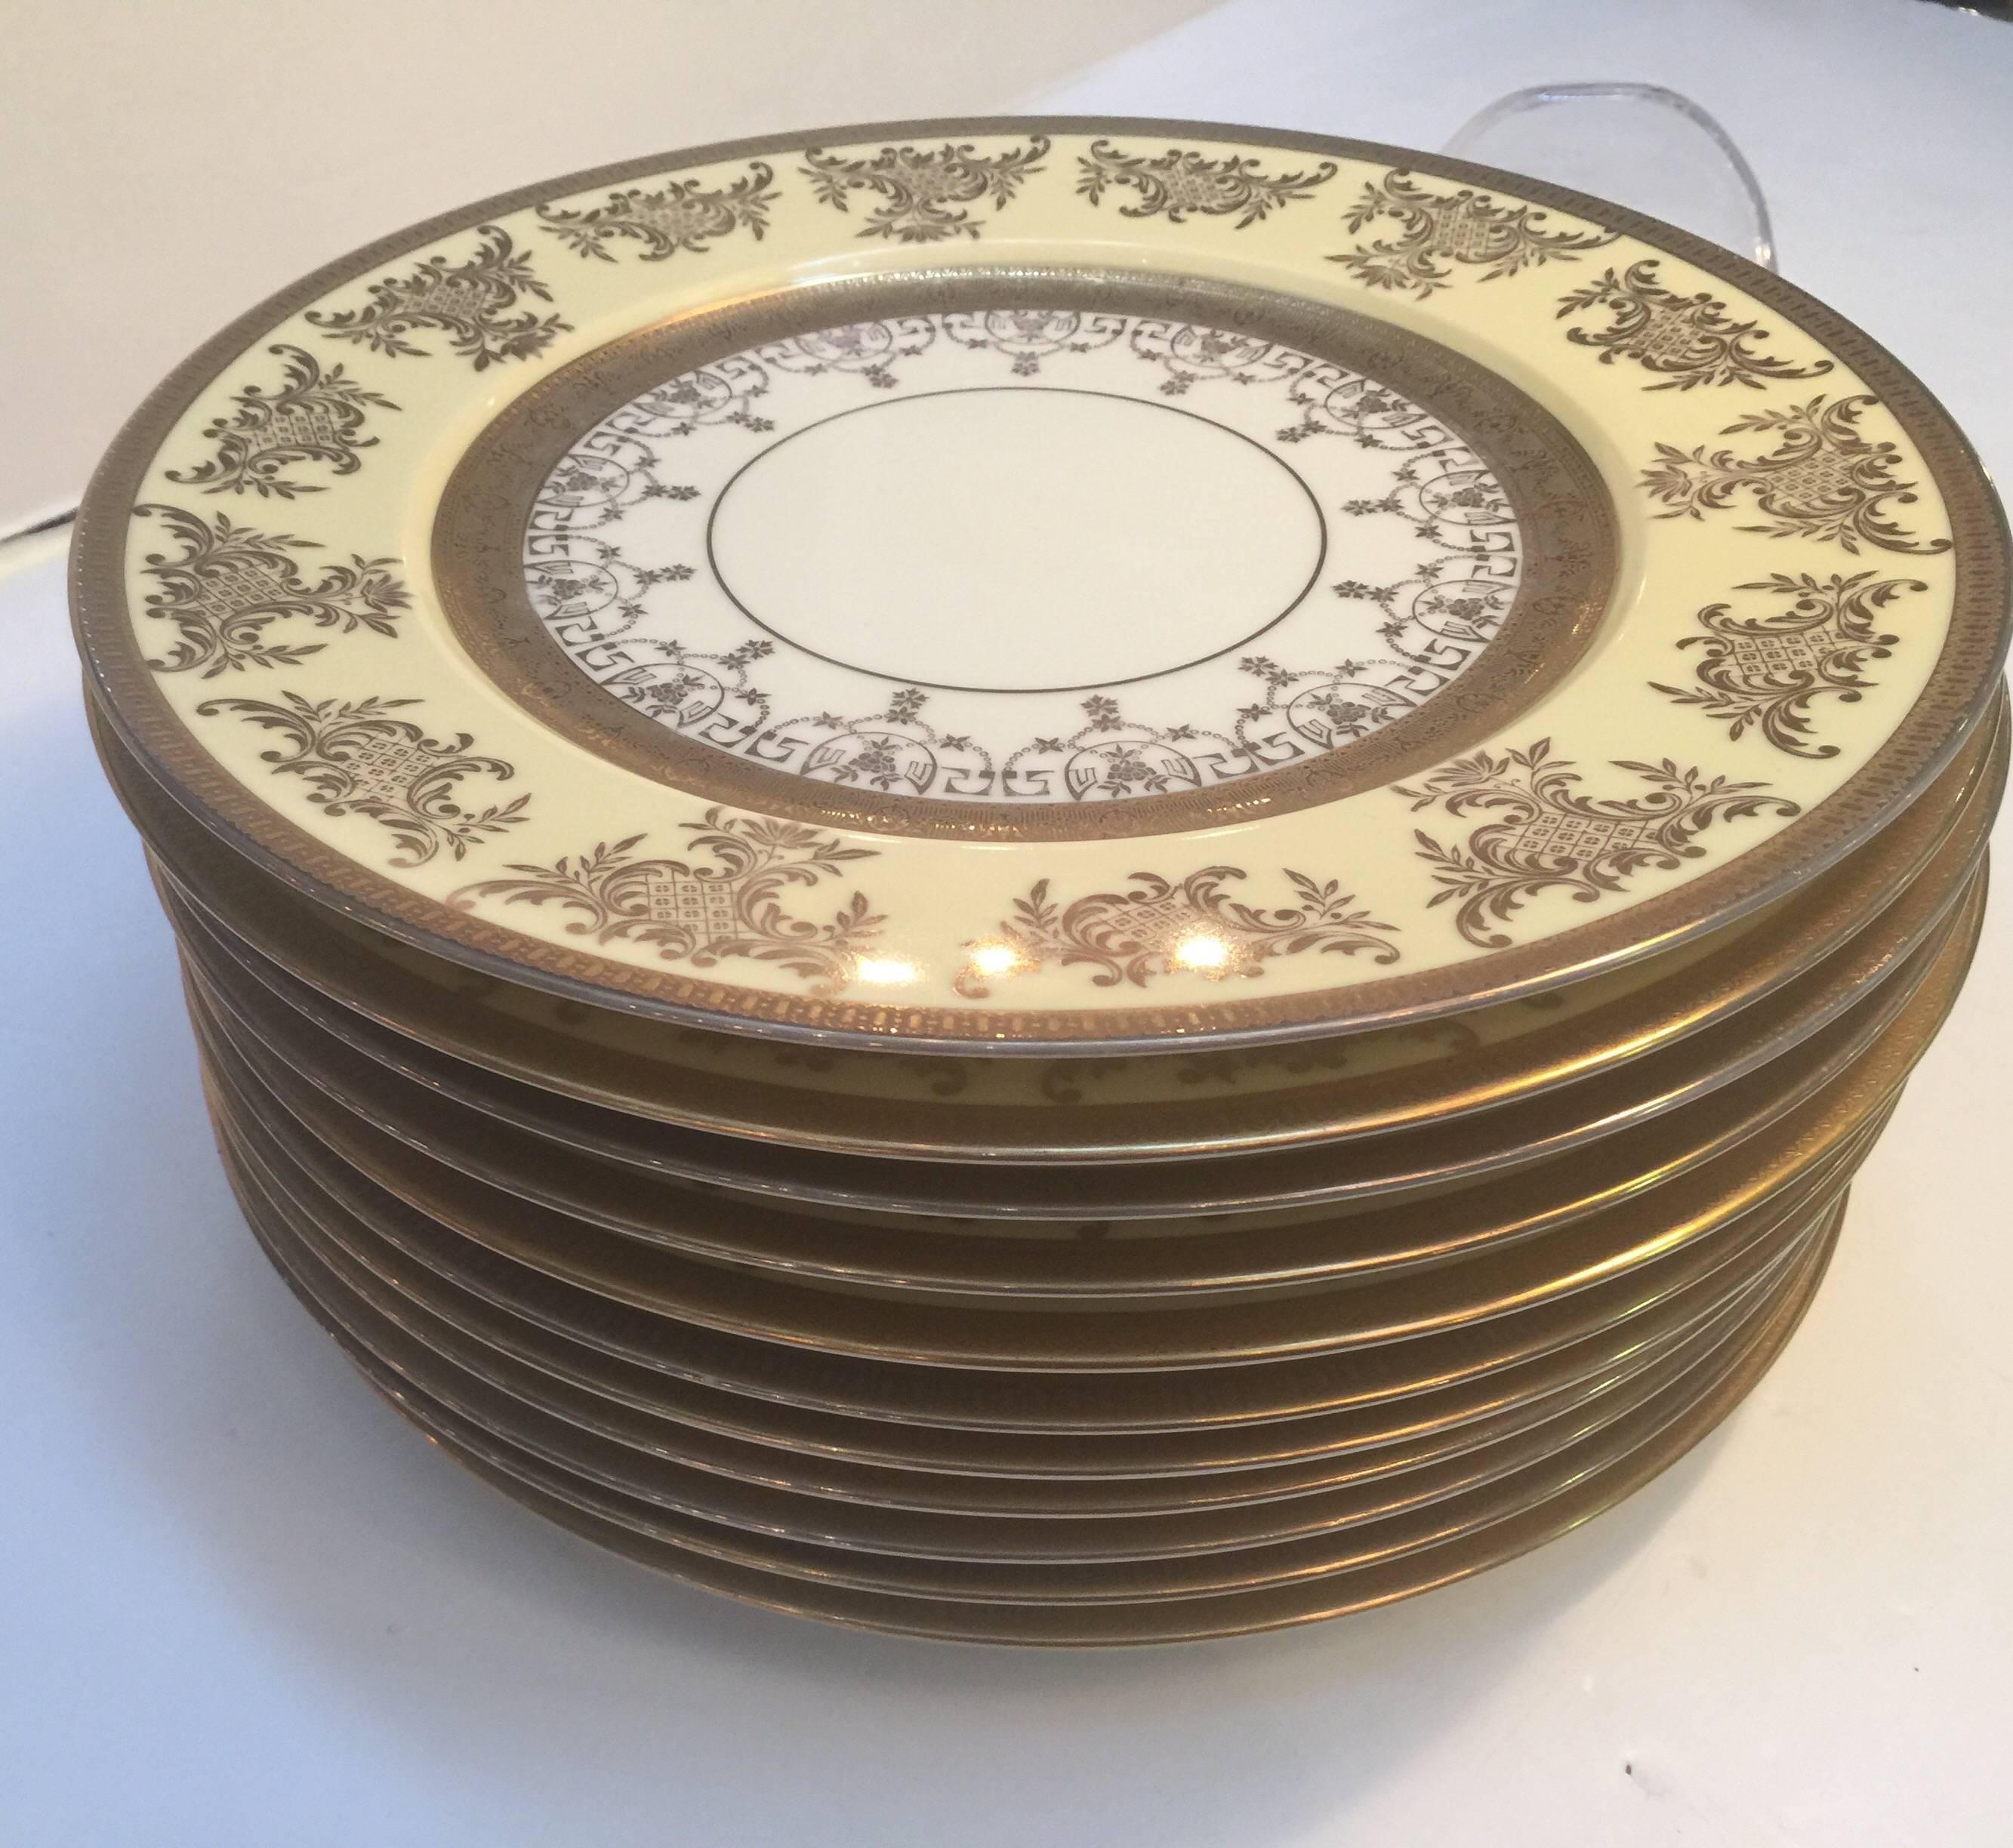 Early 20th Century Set of 12 Service Dinner Plates with Vanilla and Gilt Borders